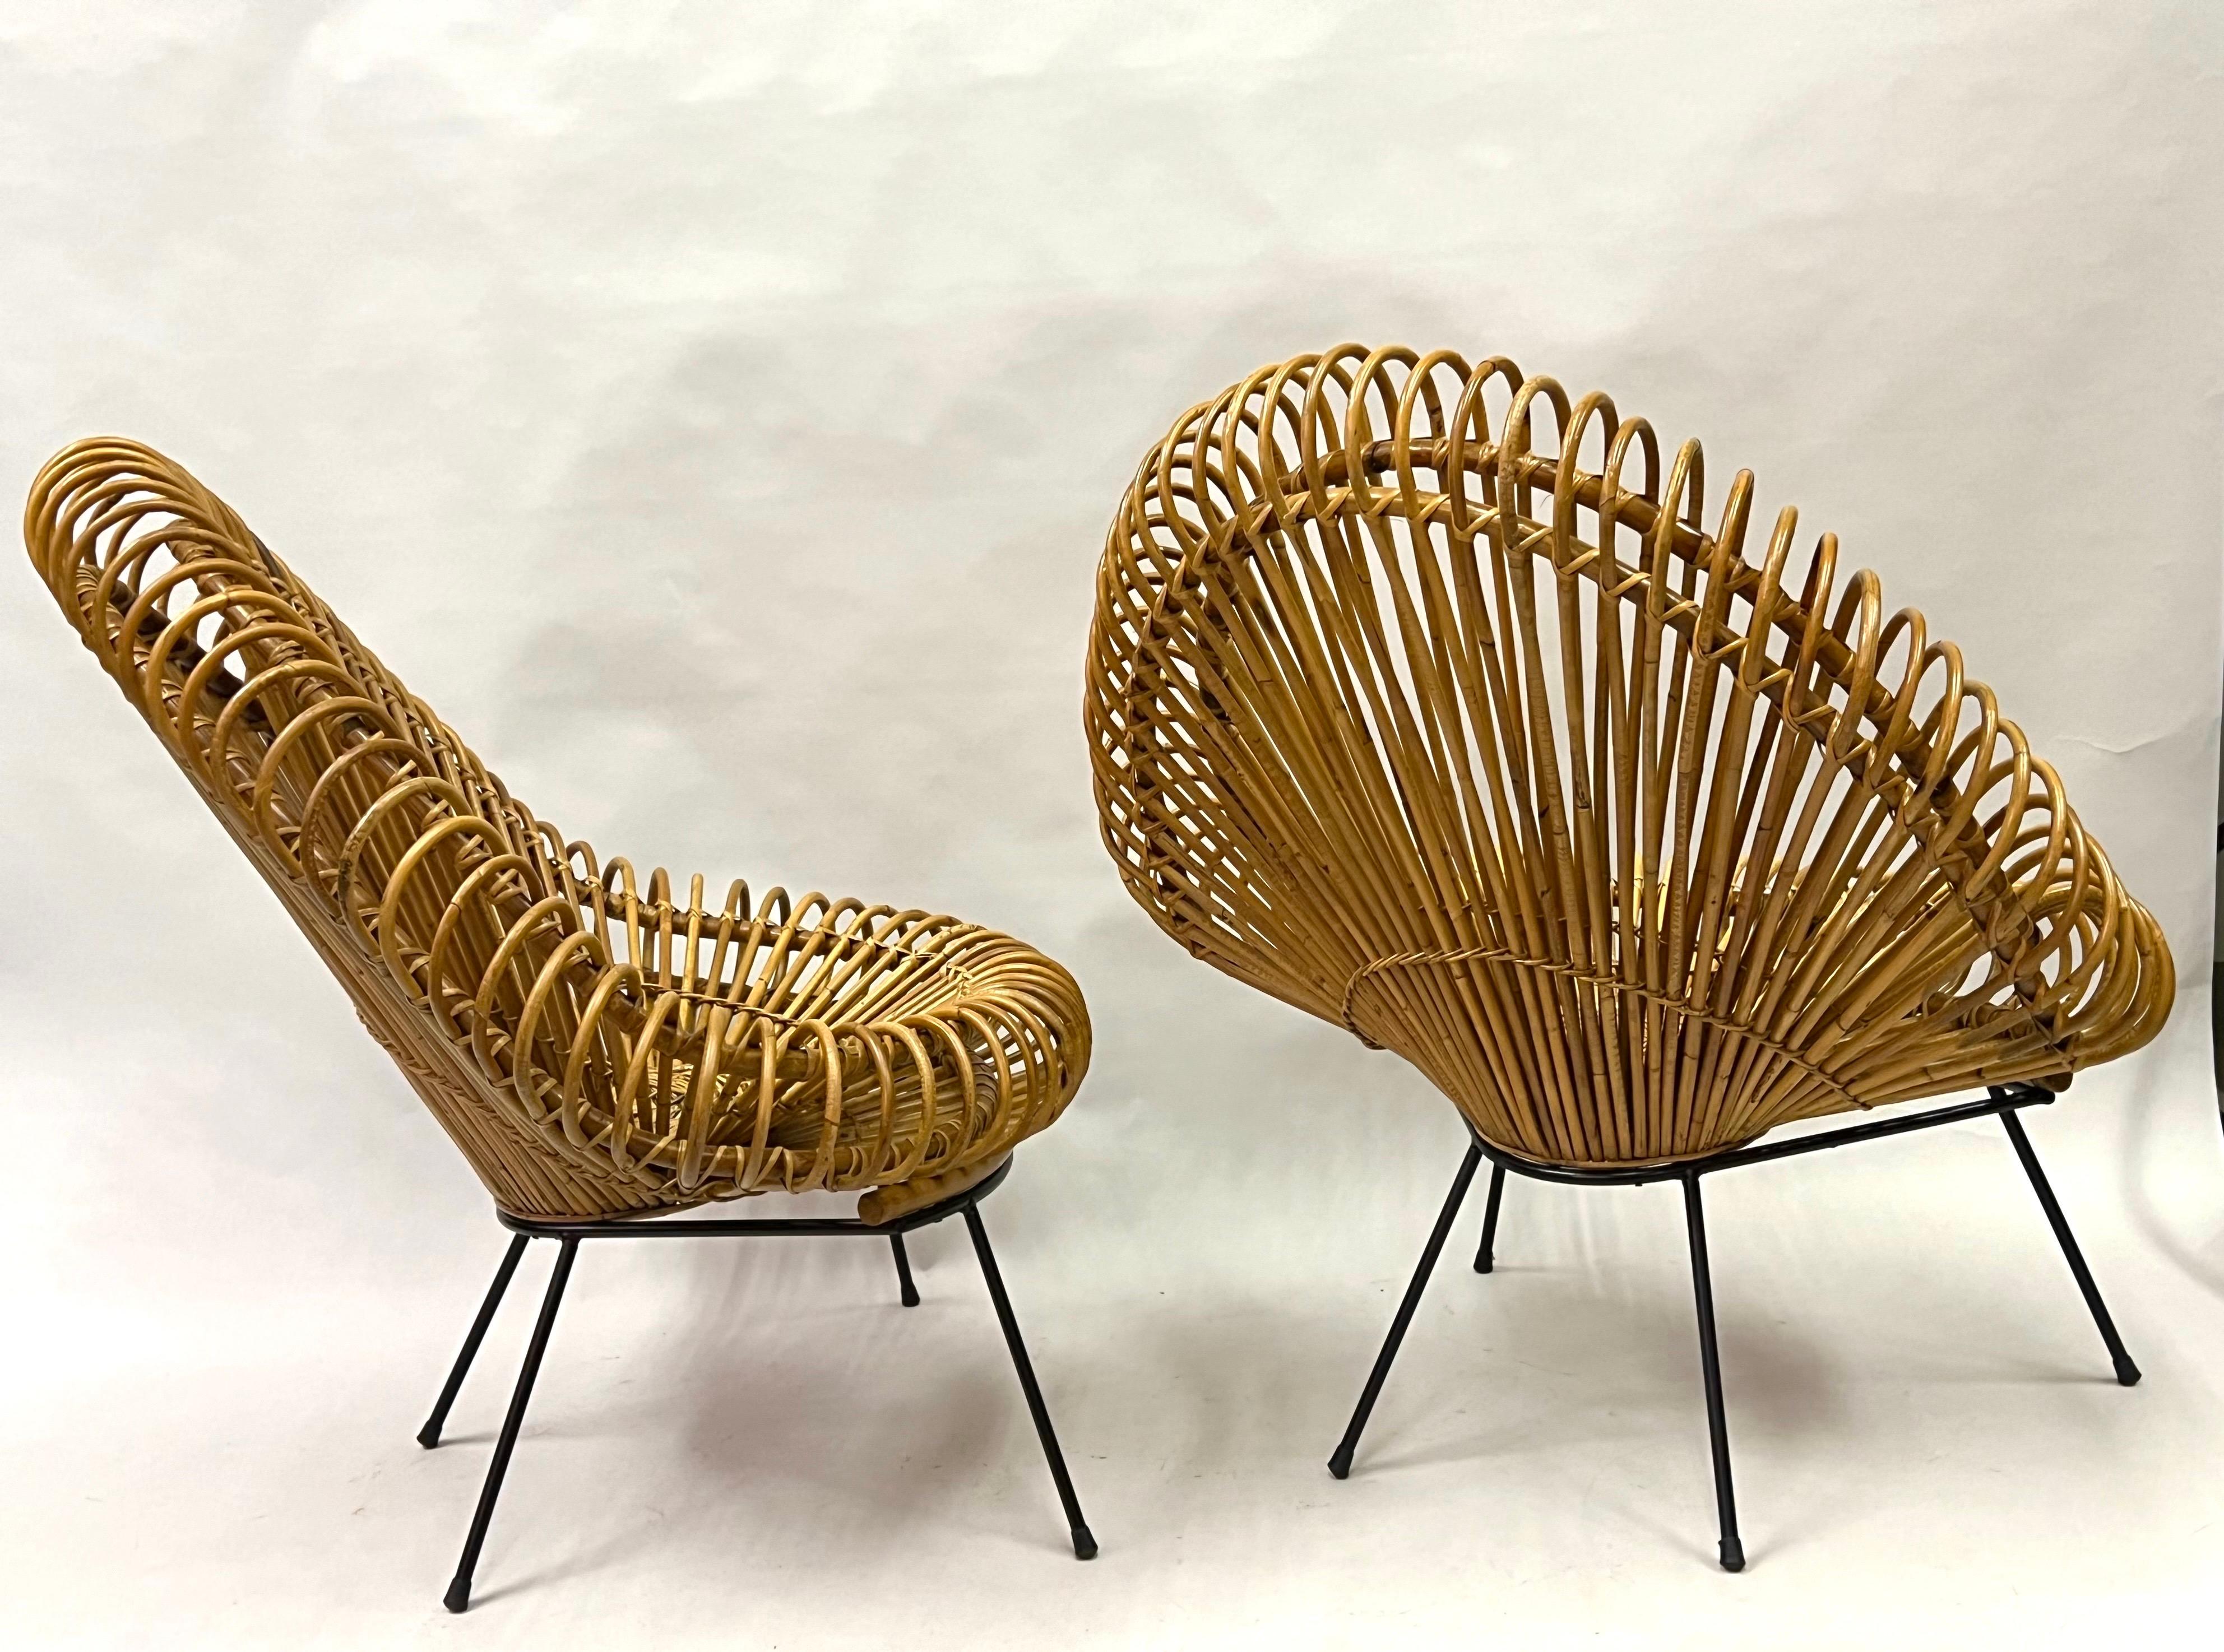 Hand-Crafted Pair of Large French Rattan Lounge Chairs by Janine Abraham & Dirk Jan Roi For Sale